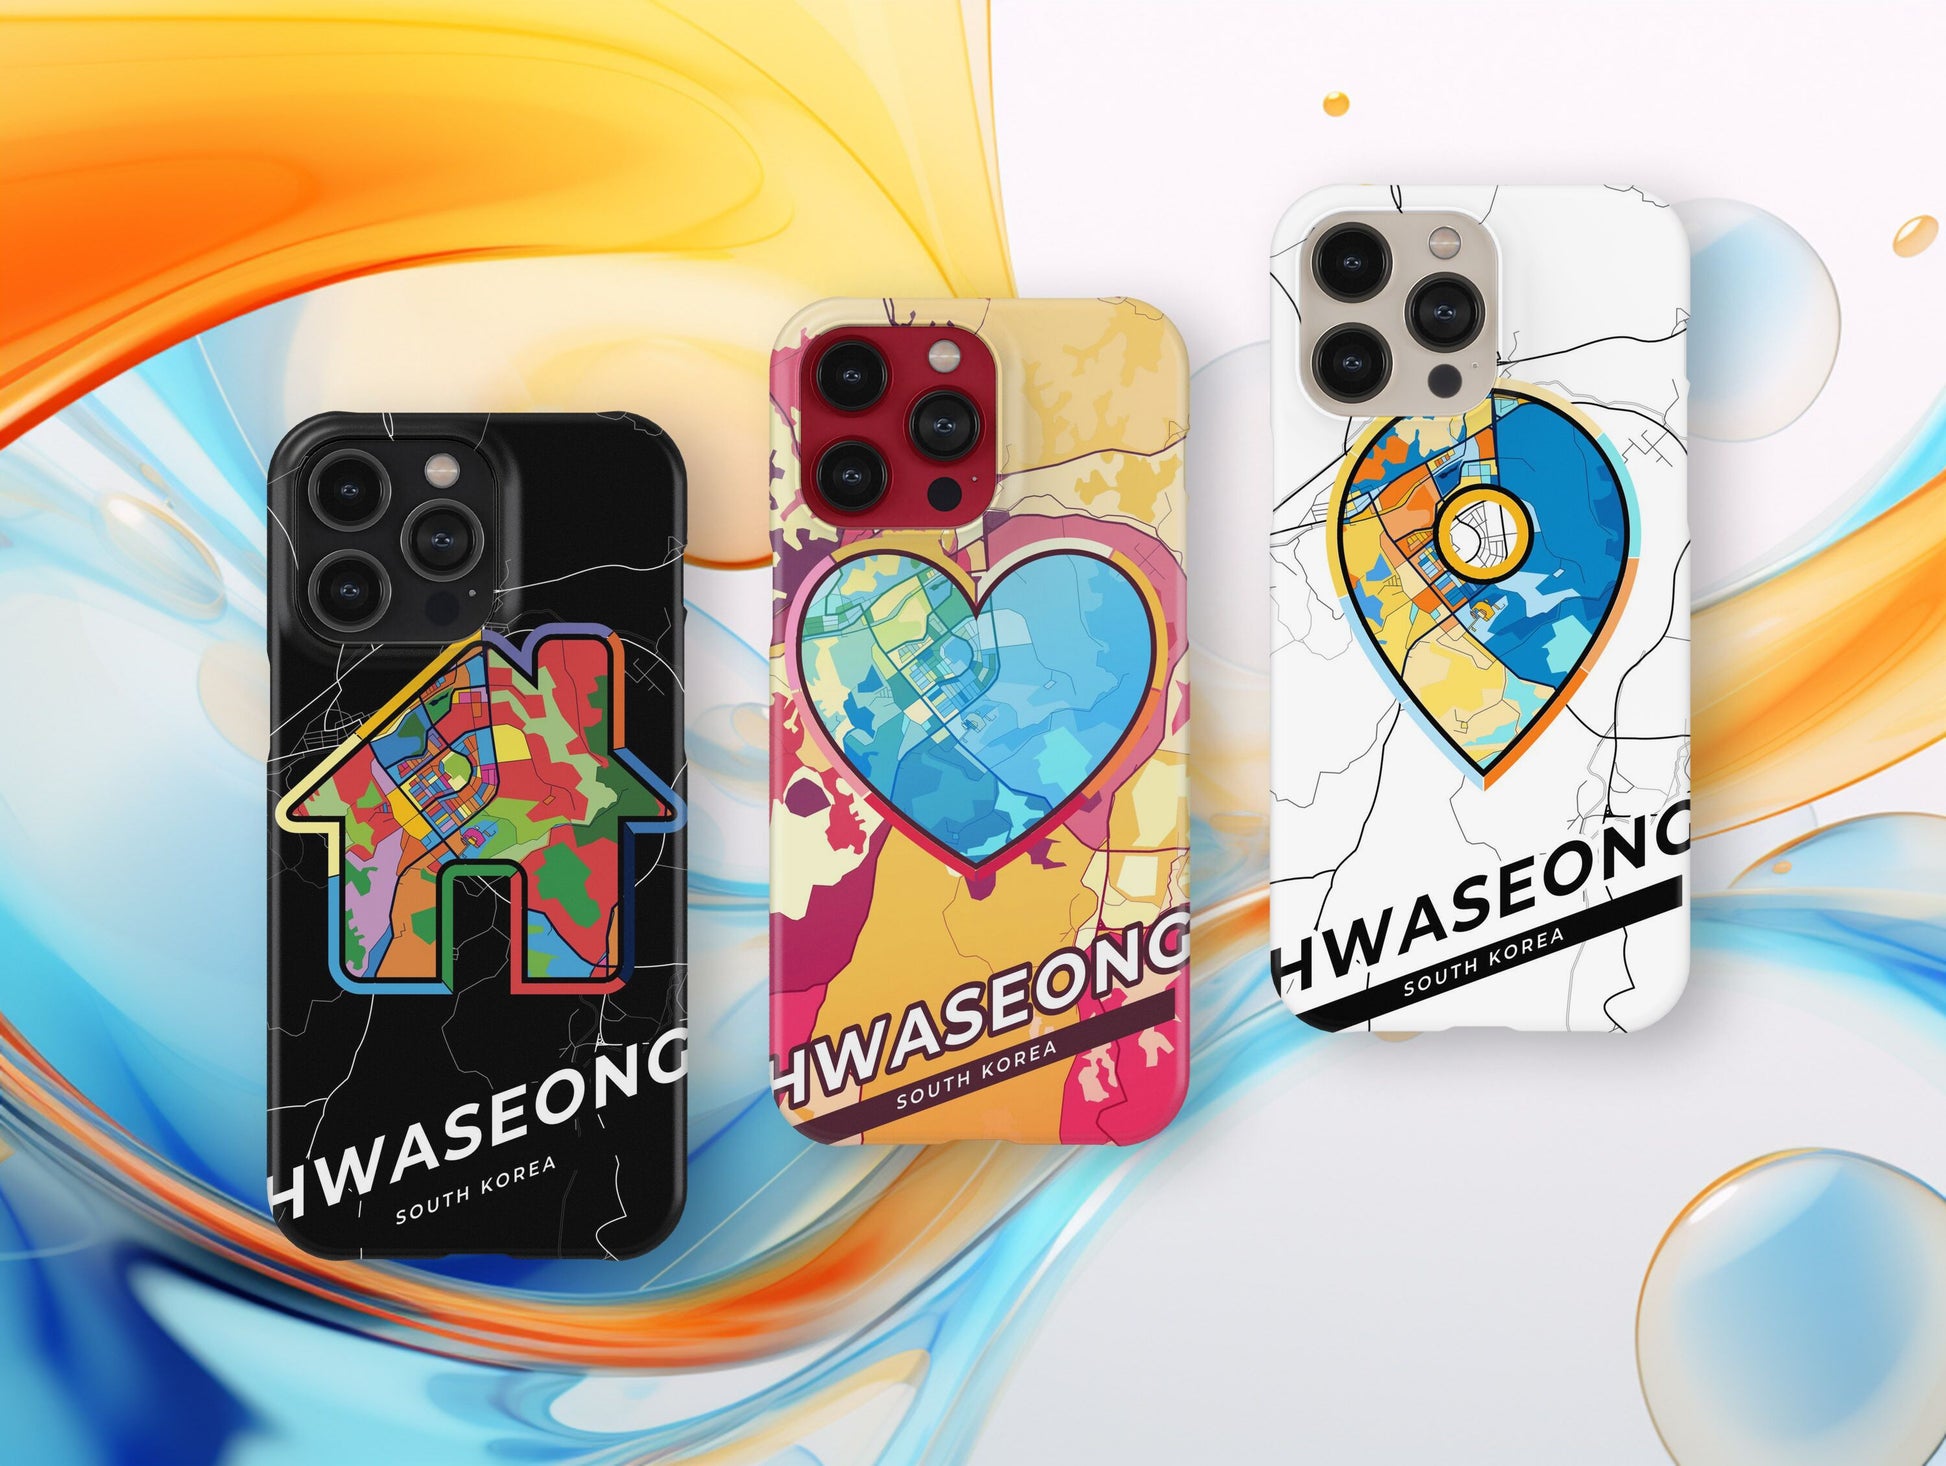 Hwaseong South Korea slim phone case with colorful icon. Birthday, wedding or housewarming gift. Couple match cases.